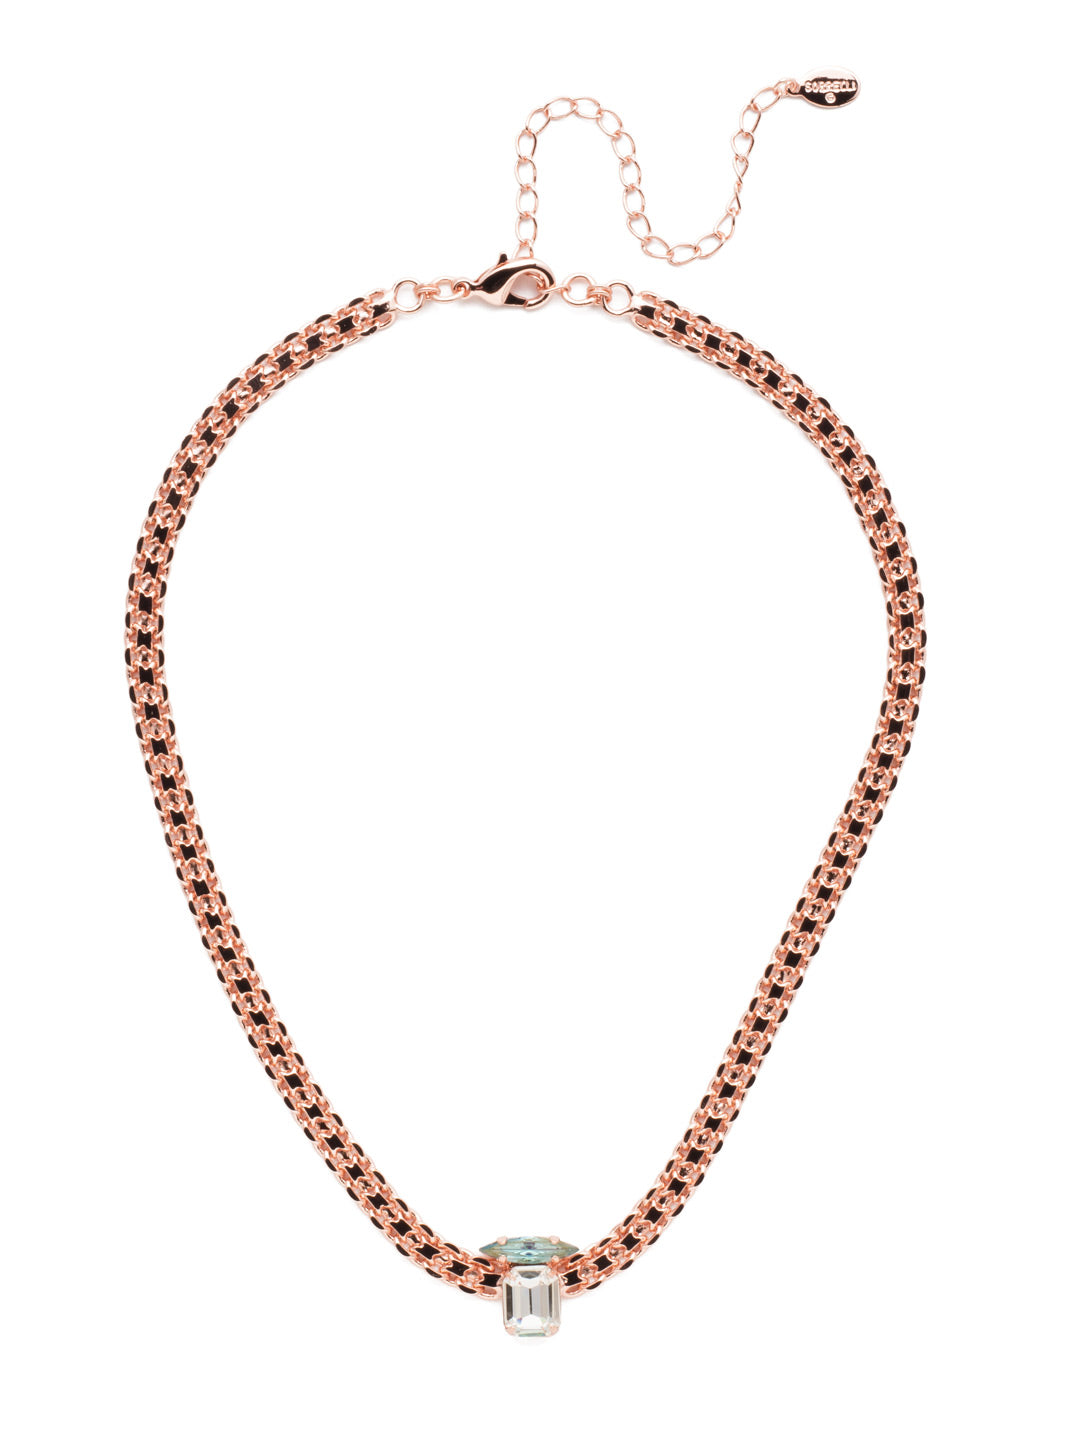 Graycen Tennis Necklace - NEP15RGCAZ - Metal rules in the Graycen Tennis Necklace. Layer on thick, dark standout links complemented by a cushion octagon and navette crystal sparkler. From Sorrelli's Crystal Azure collection in our Rose Gold-tone finish.